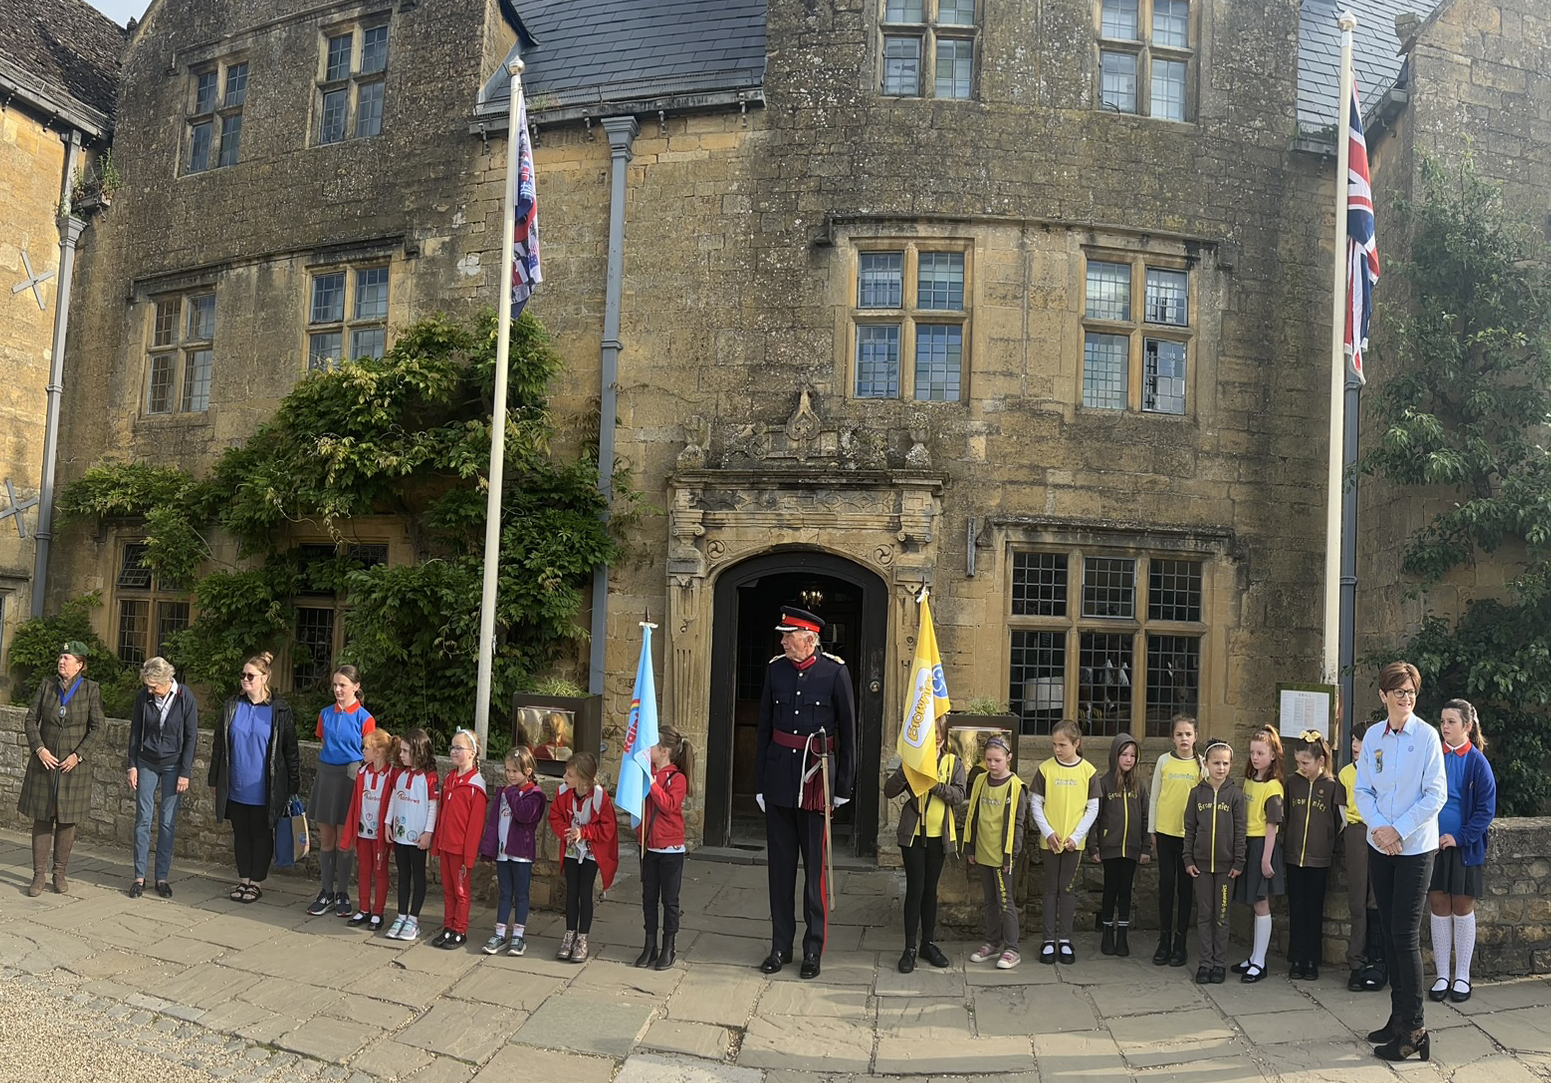 Rainbows, Brownies and Guides stood on parade outside the Lygon Arms in Broadway